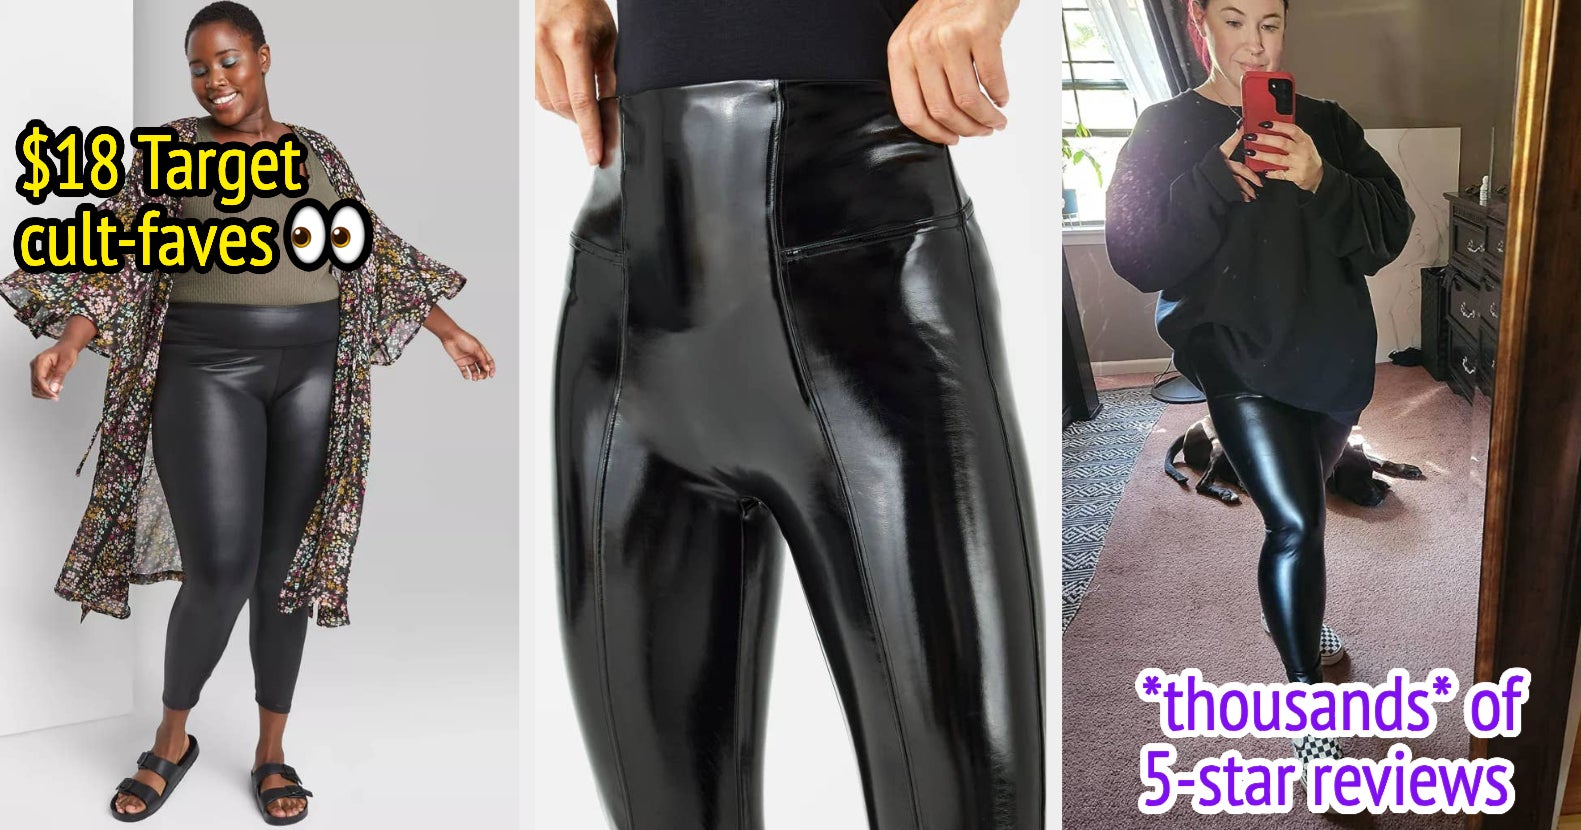 Spanx Patent Leather Leggings - Dressed to Kill